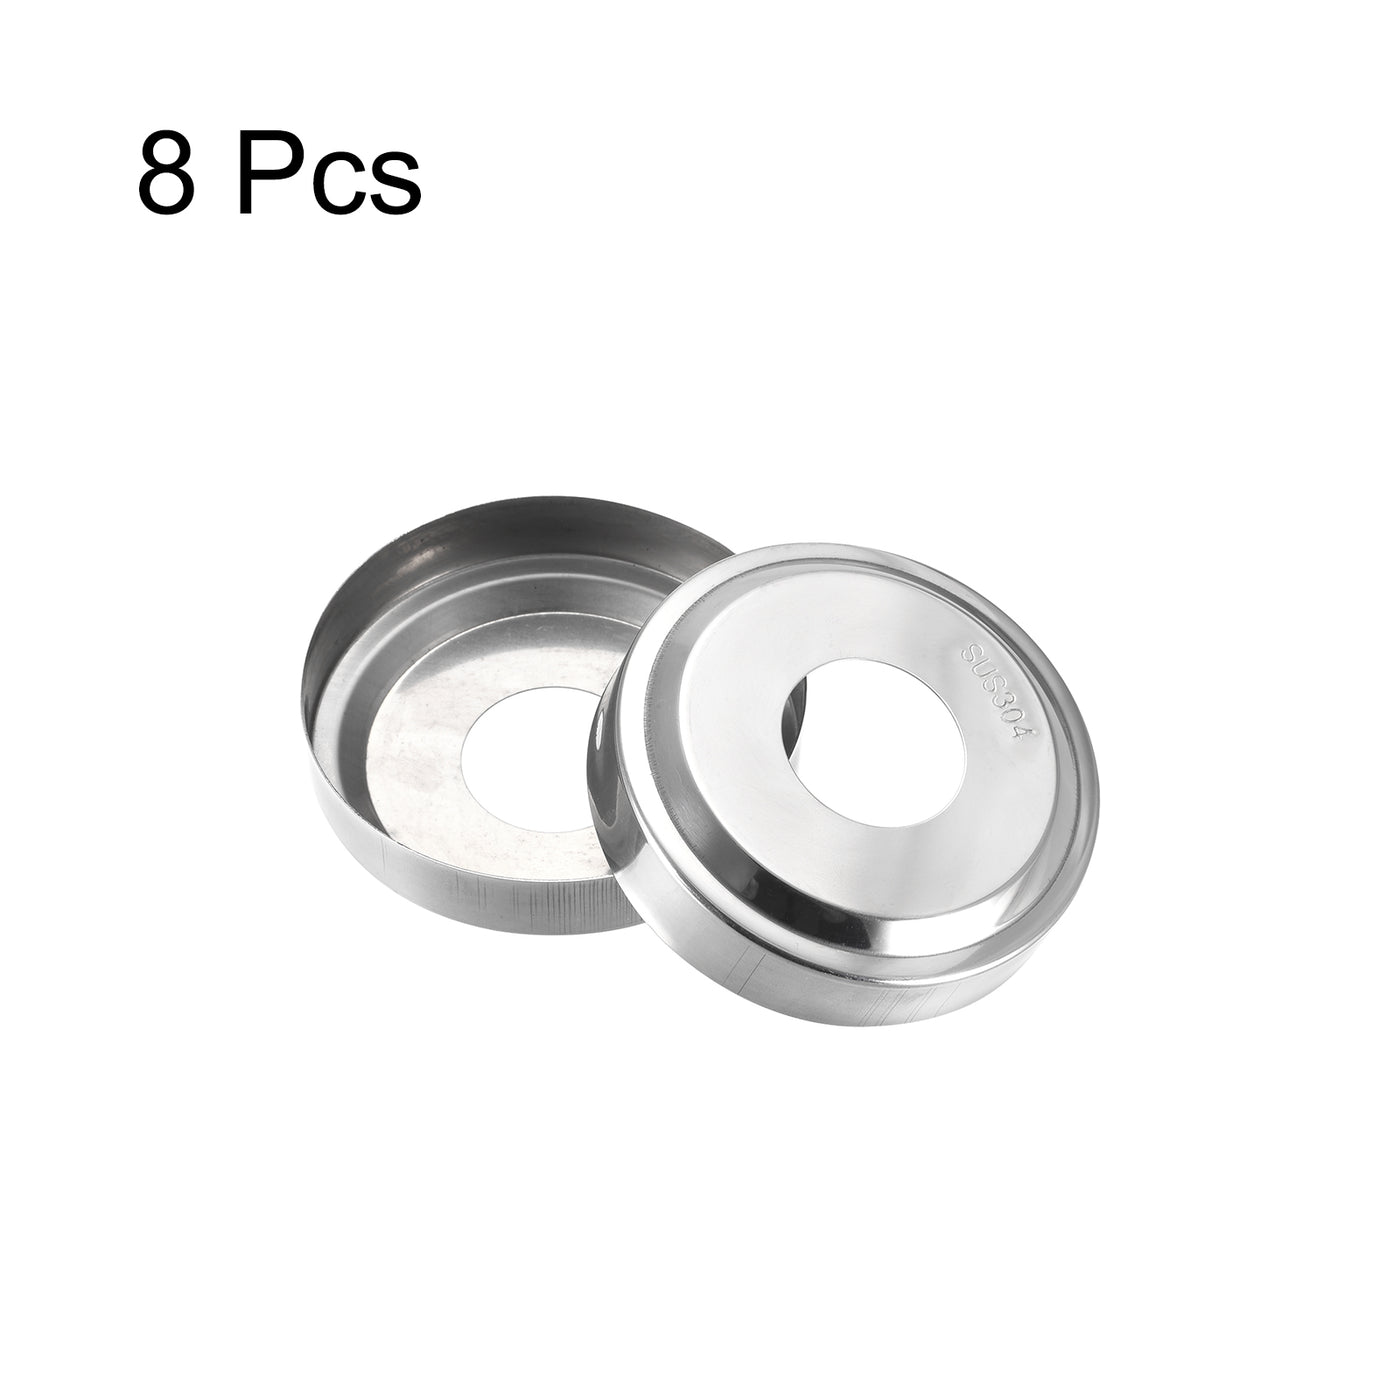 Uxcell Uxcell Round Escutcheon Plate, 8pcs 68 x 17mm 304 Stainless Steel Water Pipe Cover for 36.5mm Diameter Pipe